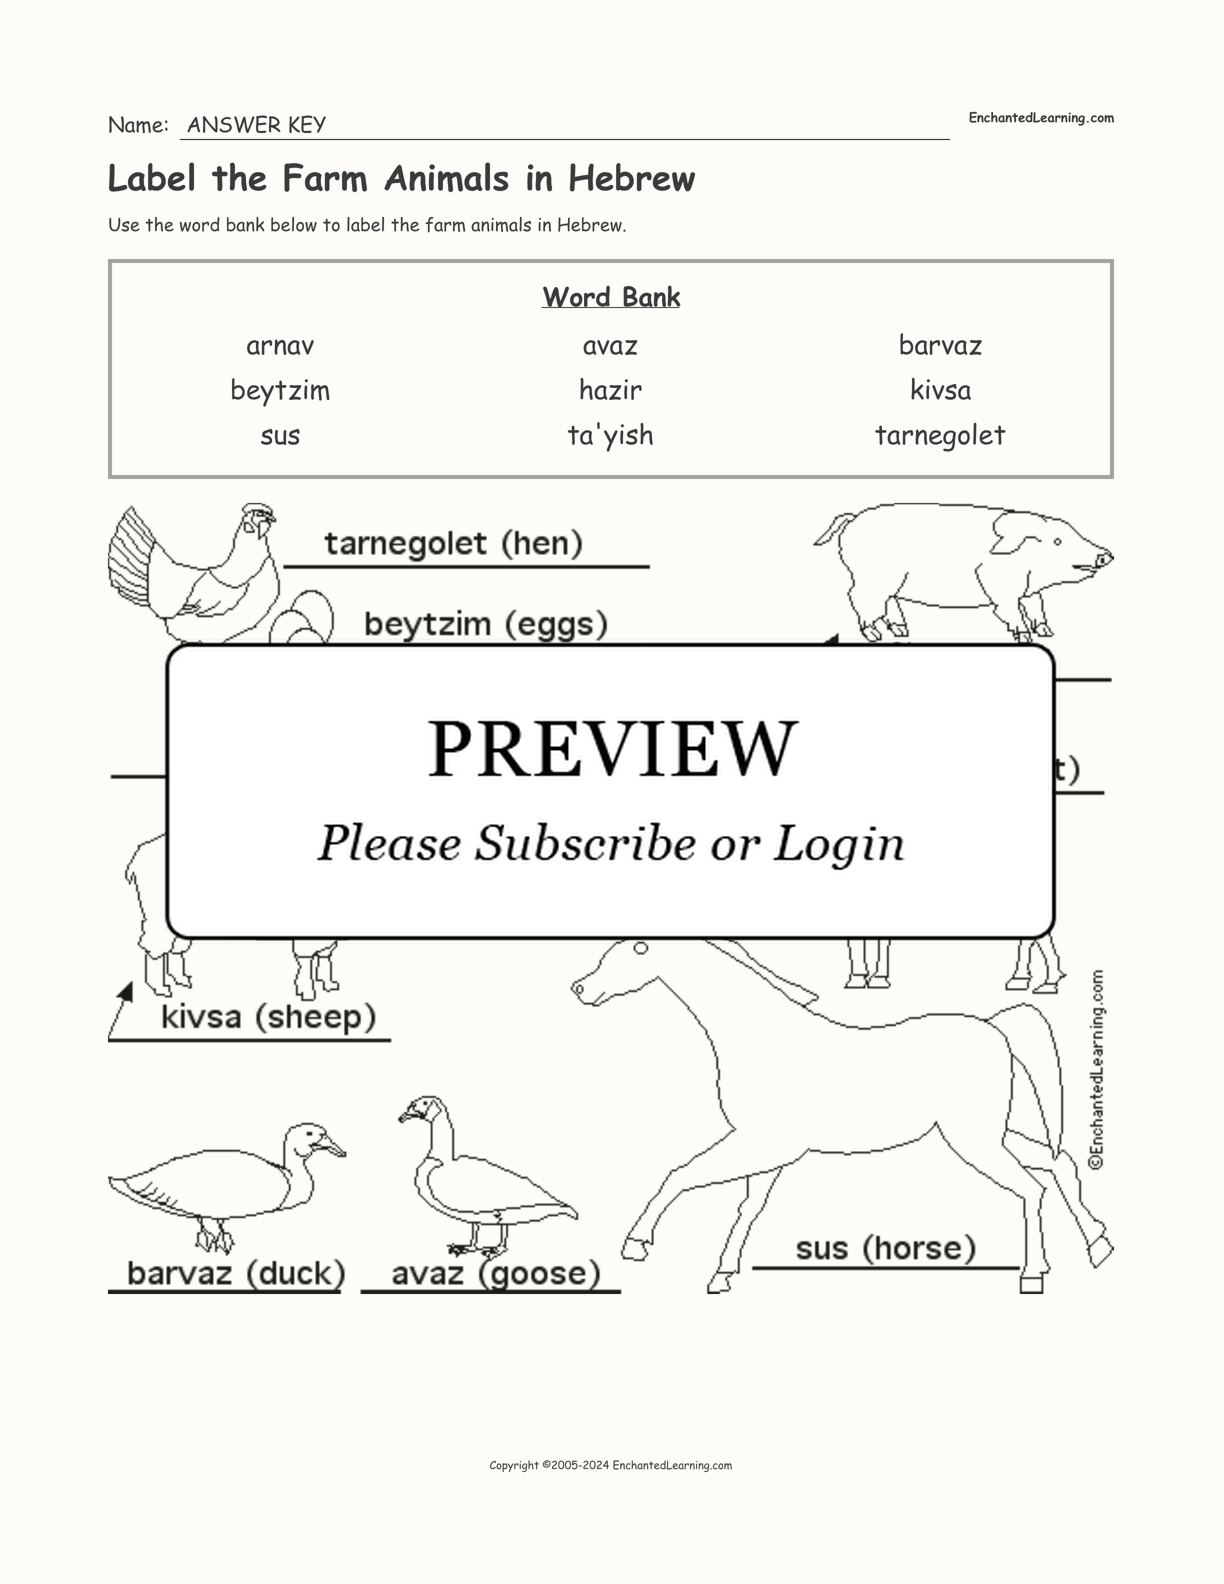 Label the Farm Animals in Hebrew interactive worksheet page 2